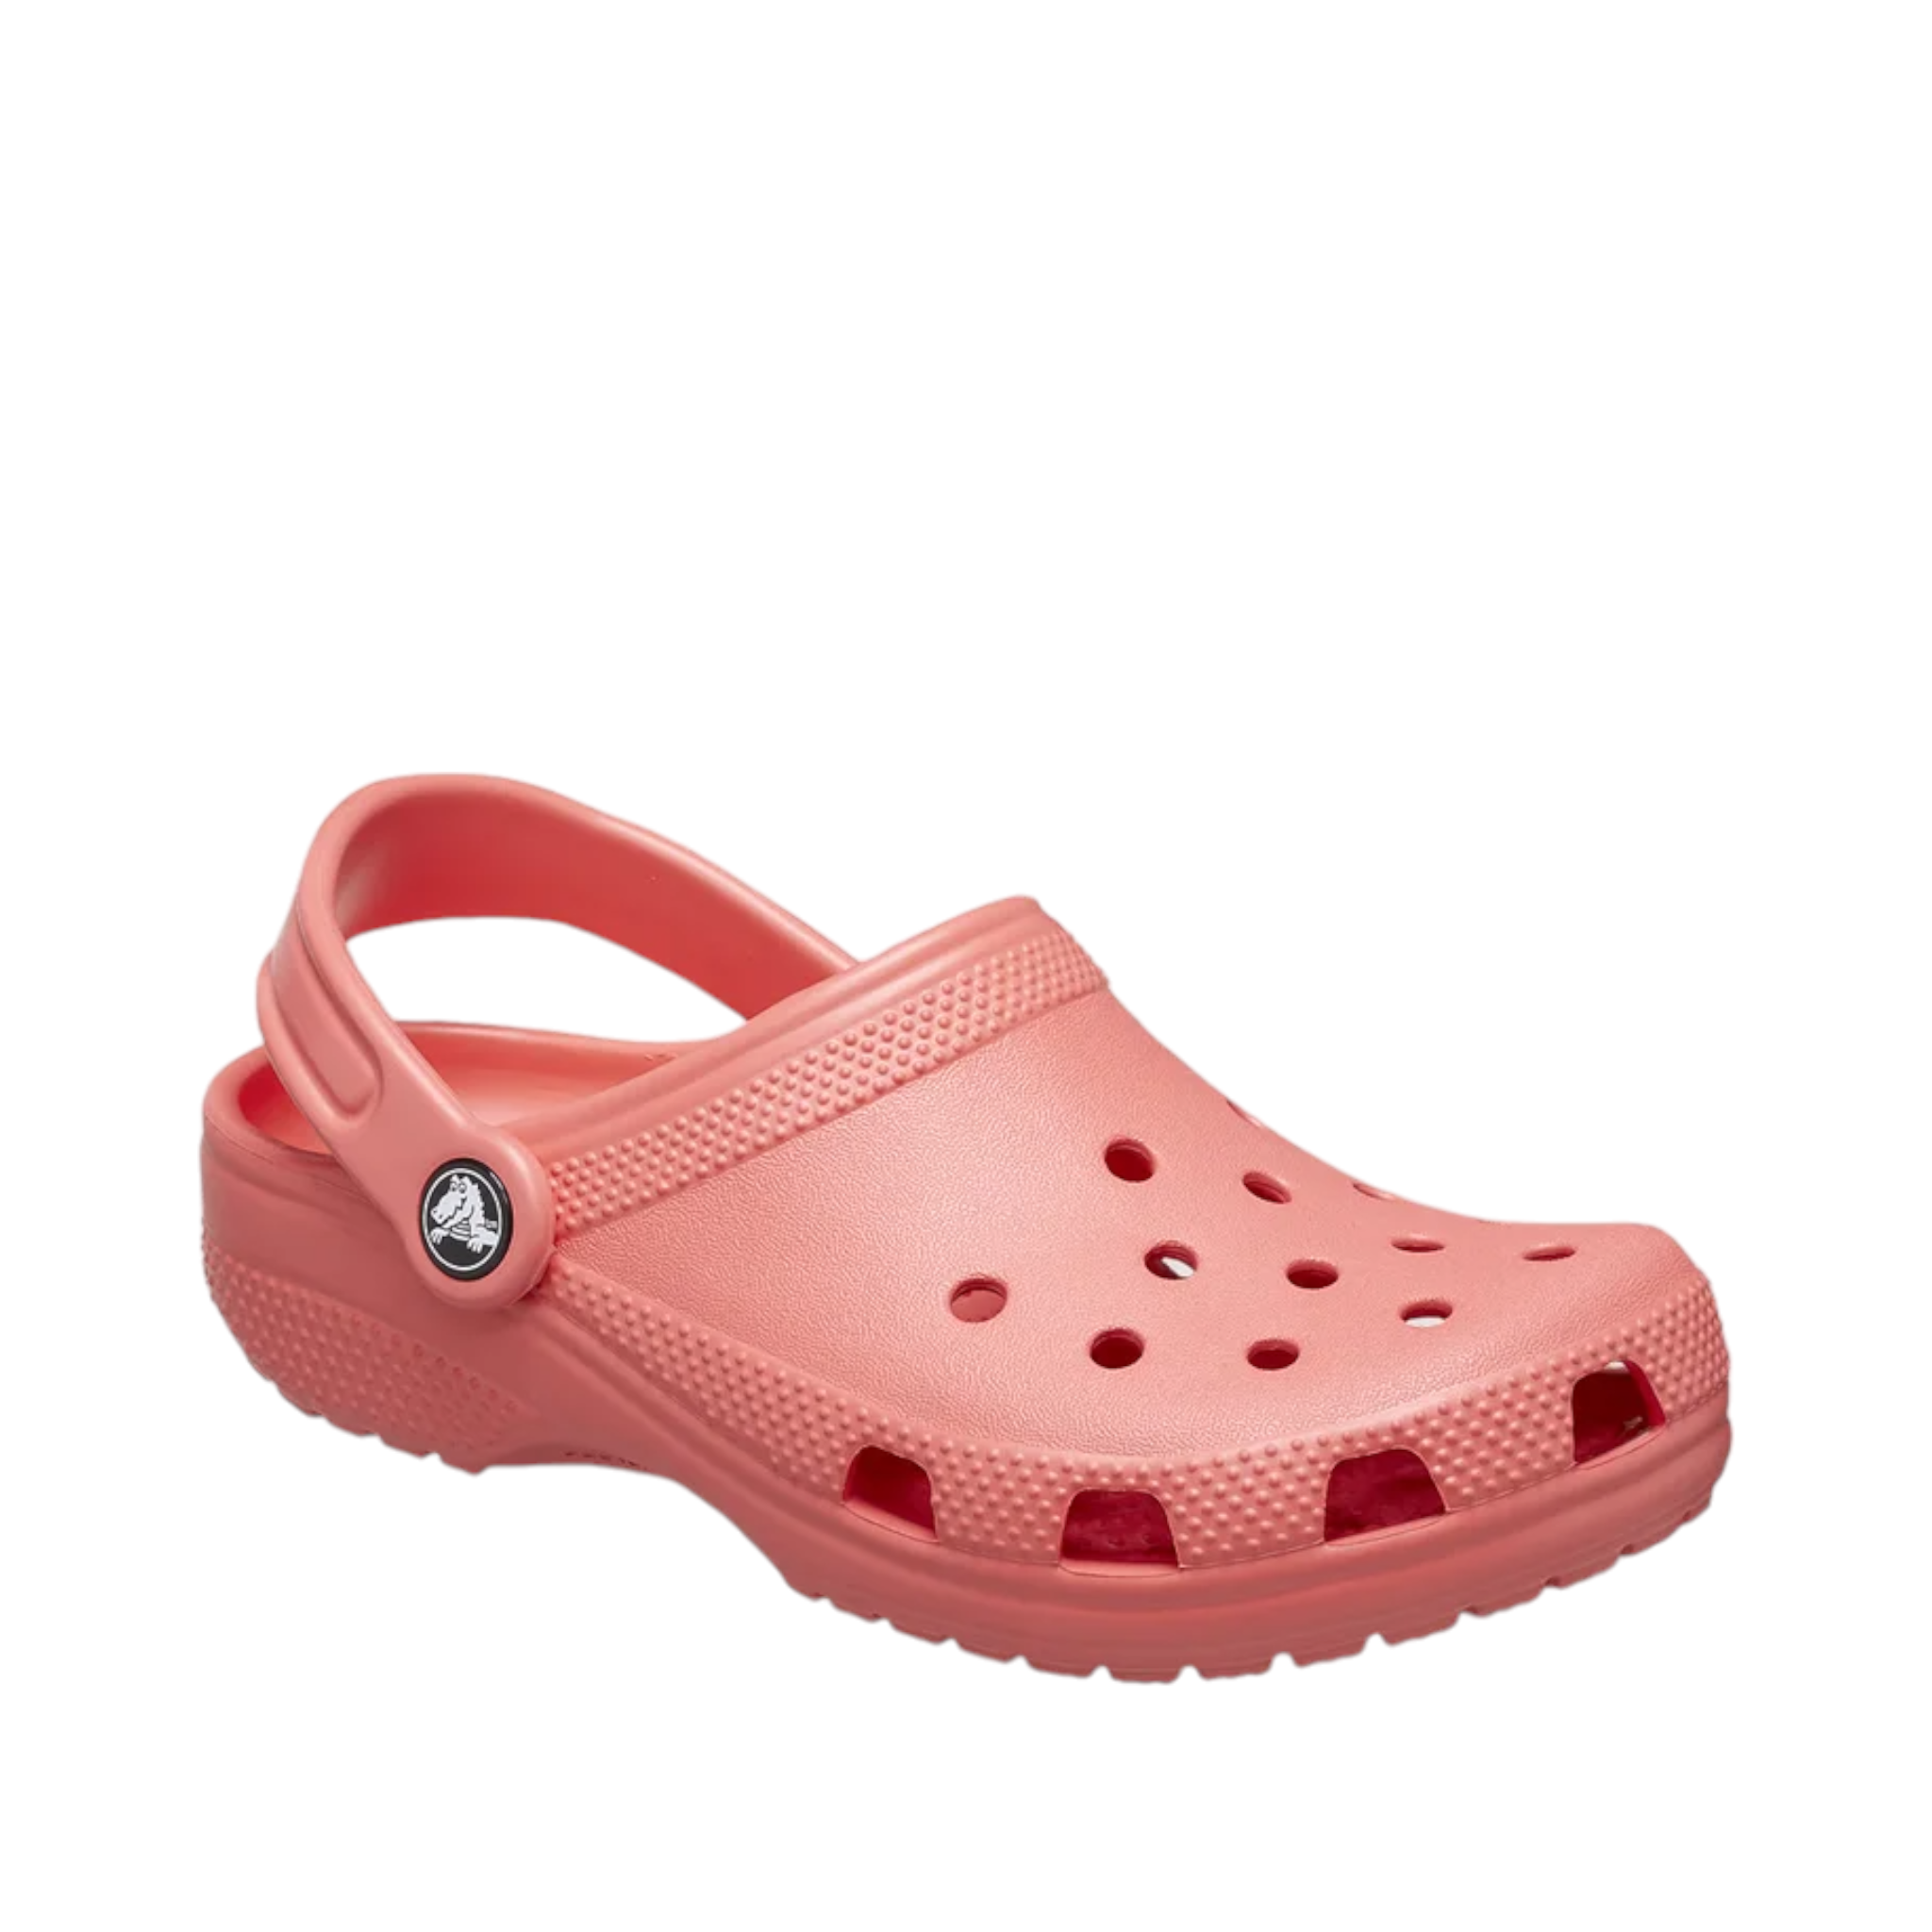 Crocs Classic Clogs online and instore with shoe&me Mount Maunganui. Shop Watermelon Clogs